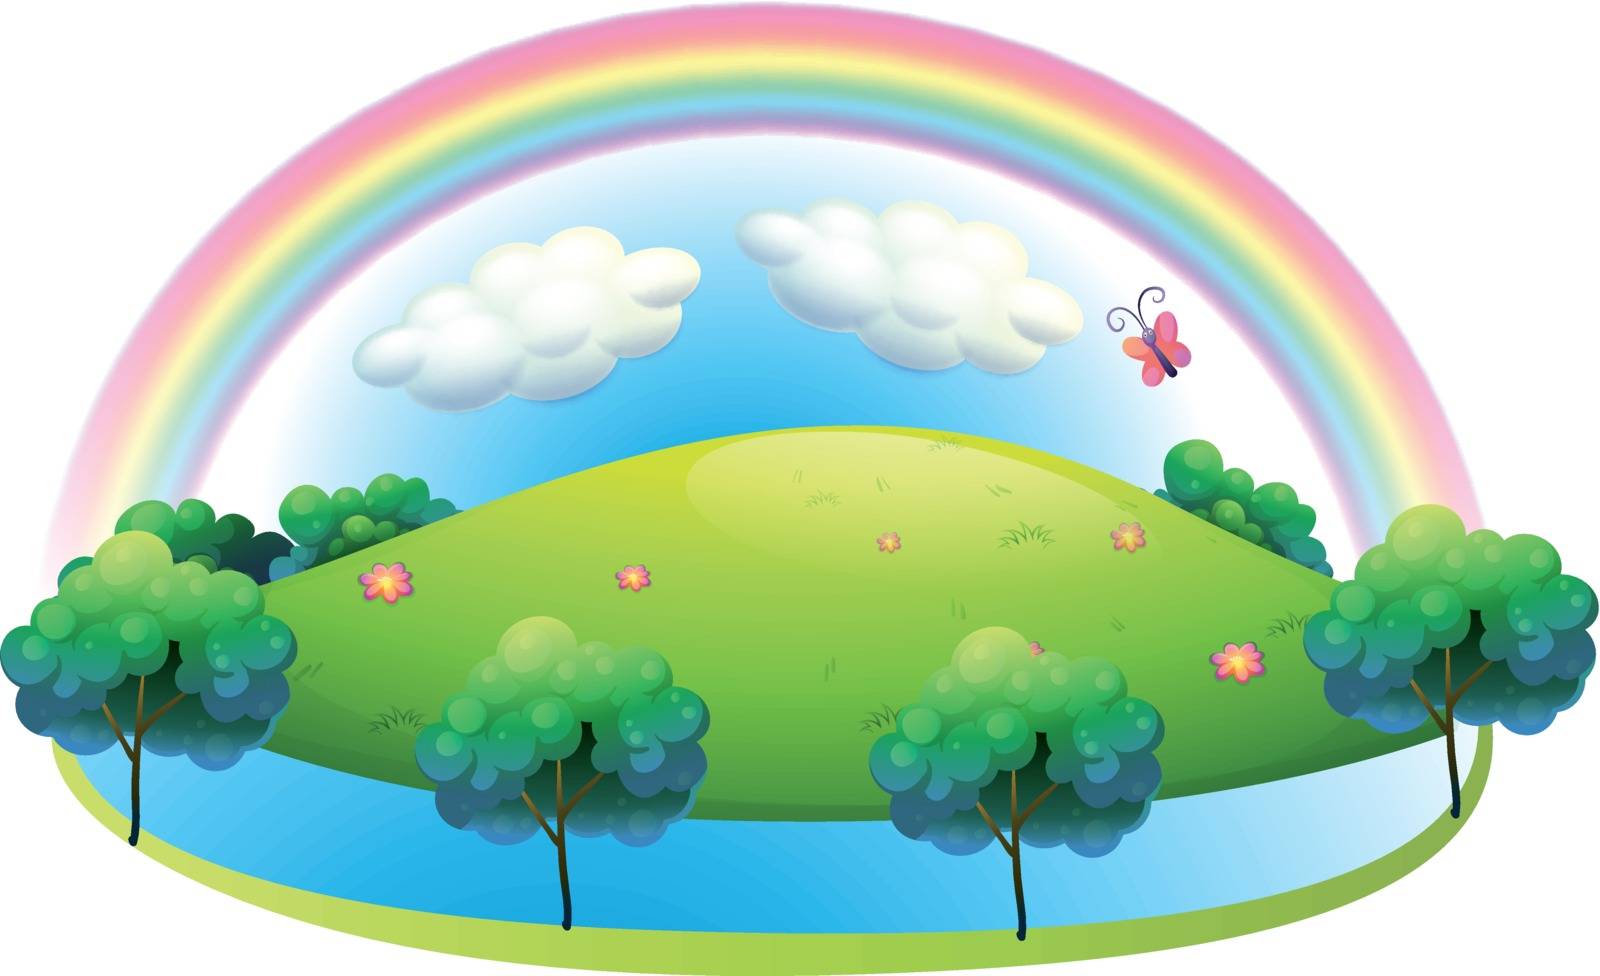 Illustration of a rainbow at the hill on a white background